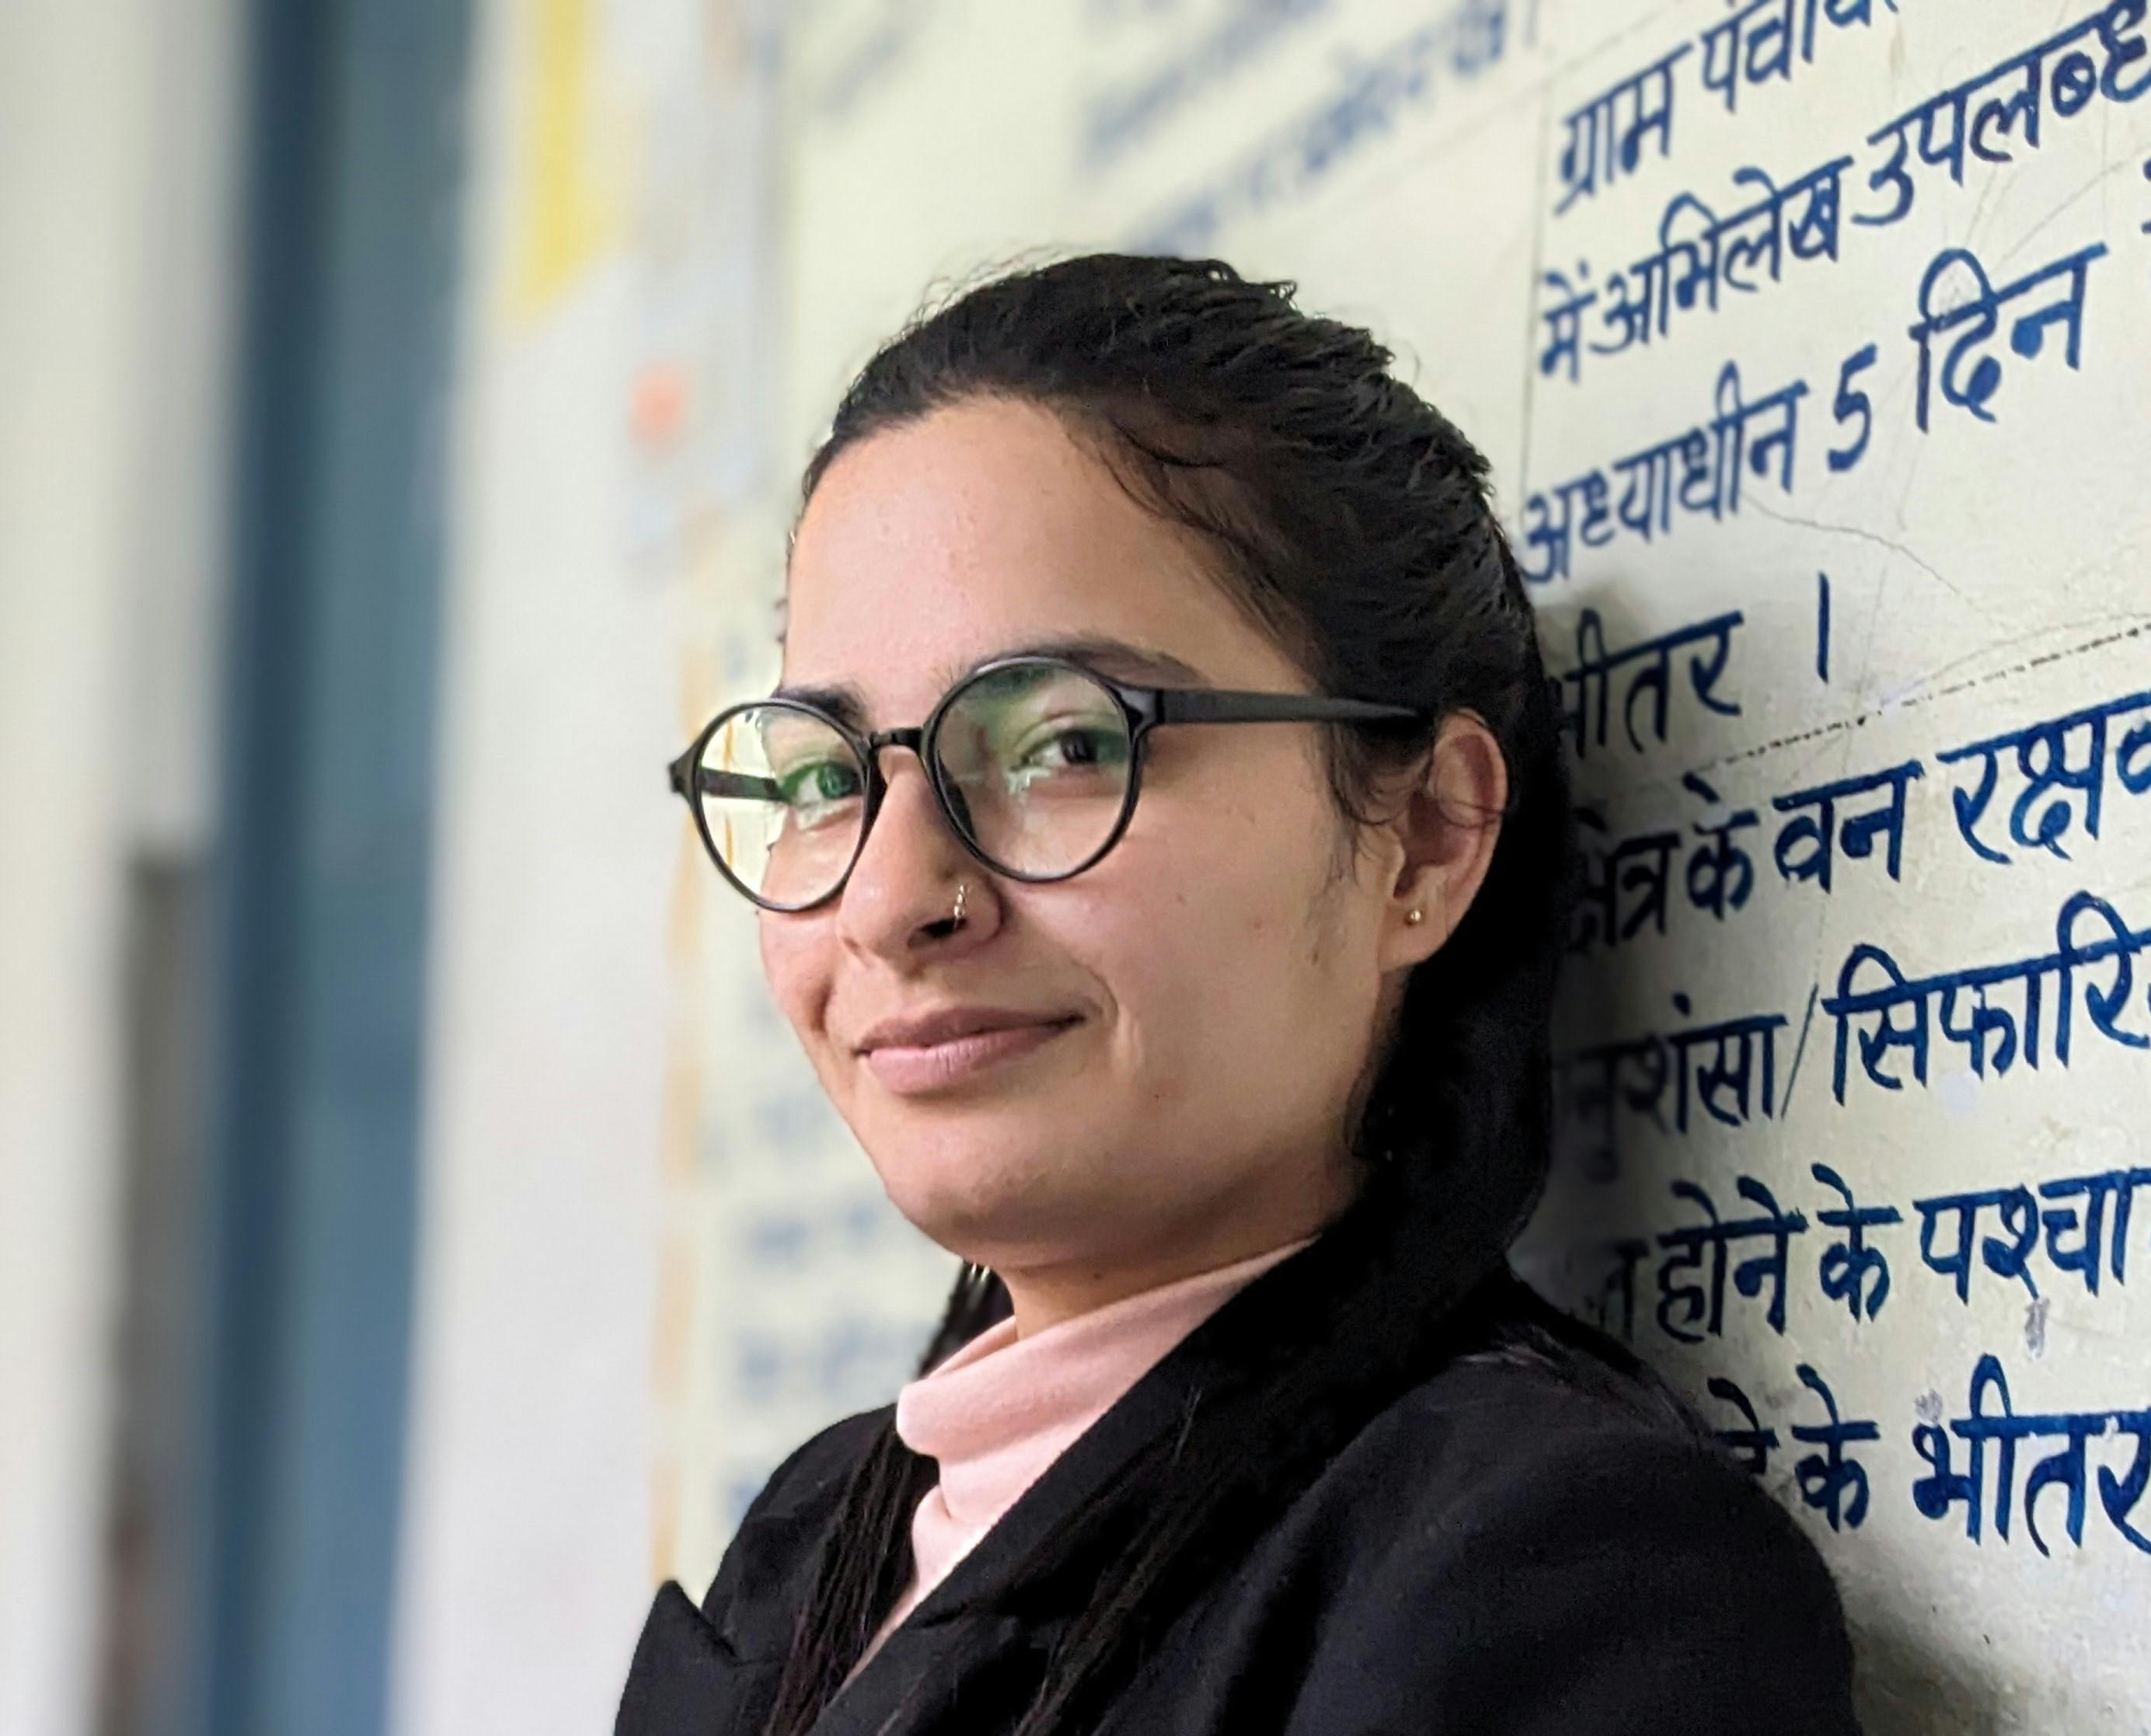 Chandni is a local teacher with a Master's degree in History. She is dedicated to helping children learn better as well as to her own continued learning and growth. 